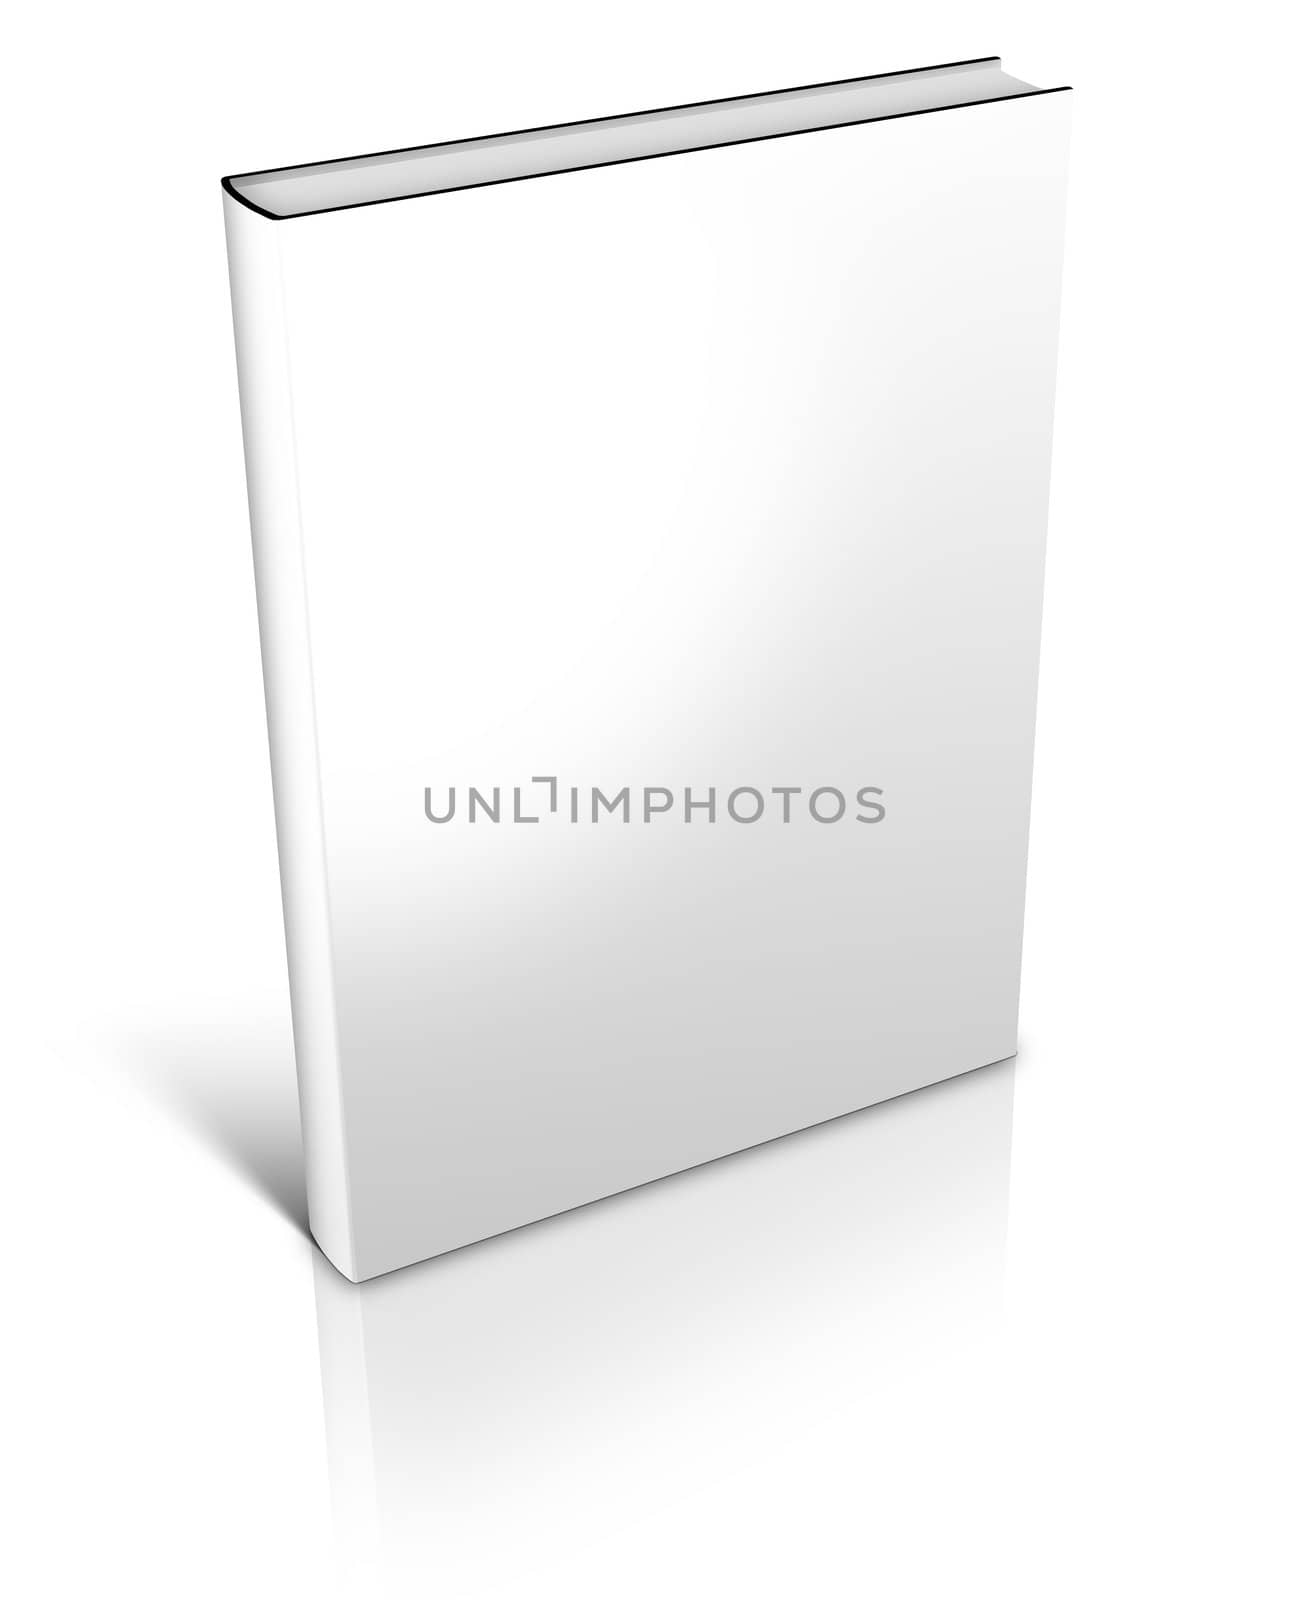 3D white Hard Cover Book isolated on white background